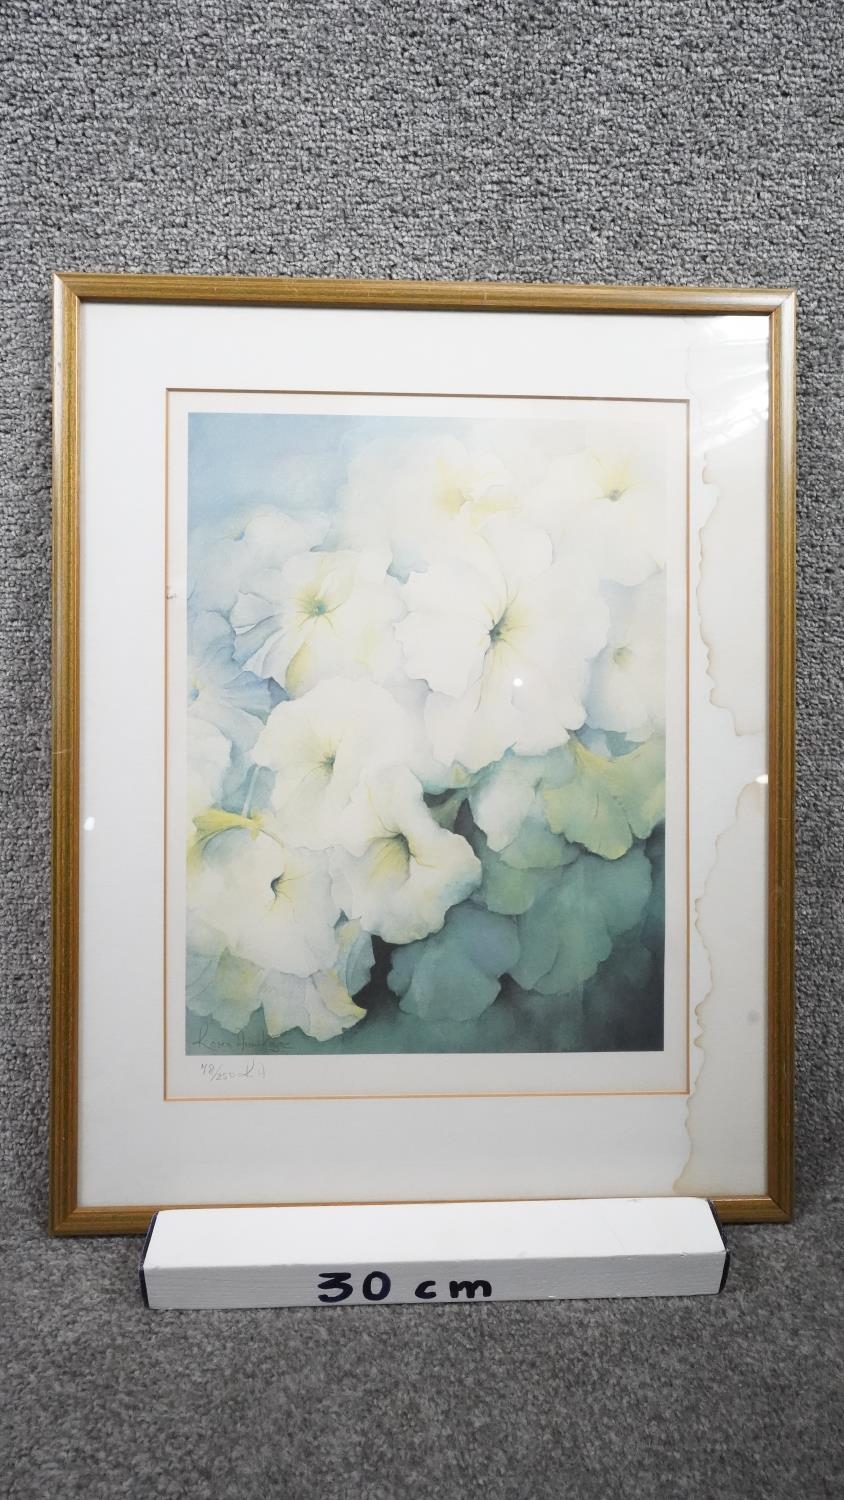 Karen Armitage - A framed and glazed signed limited edition print of flowers. Edition 72/250. H.54 - Image 6 of 6